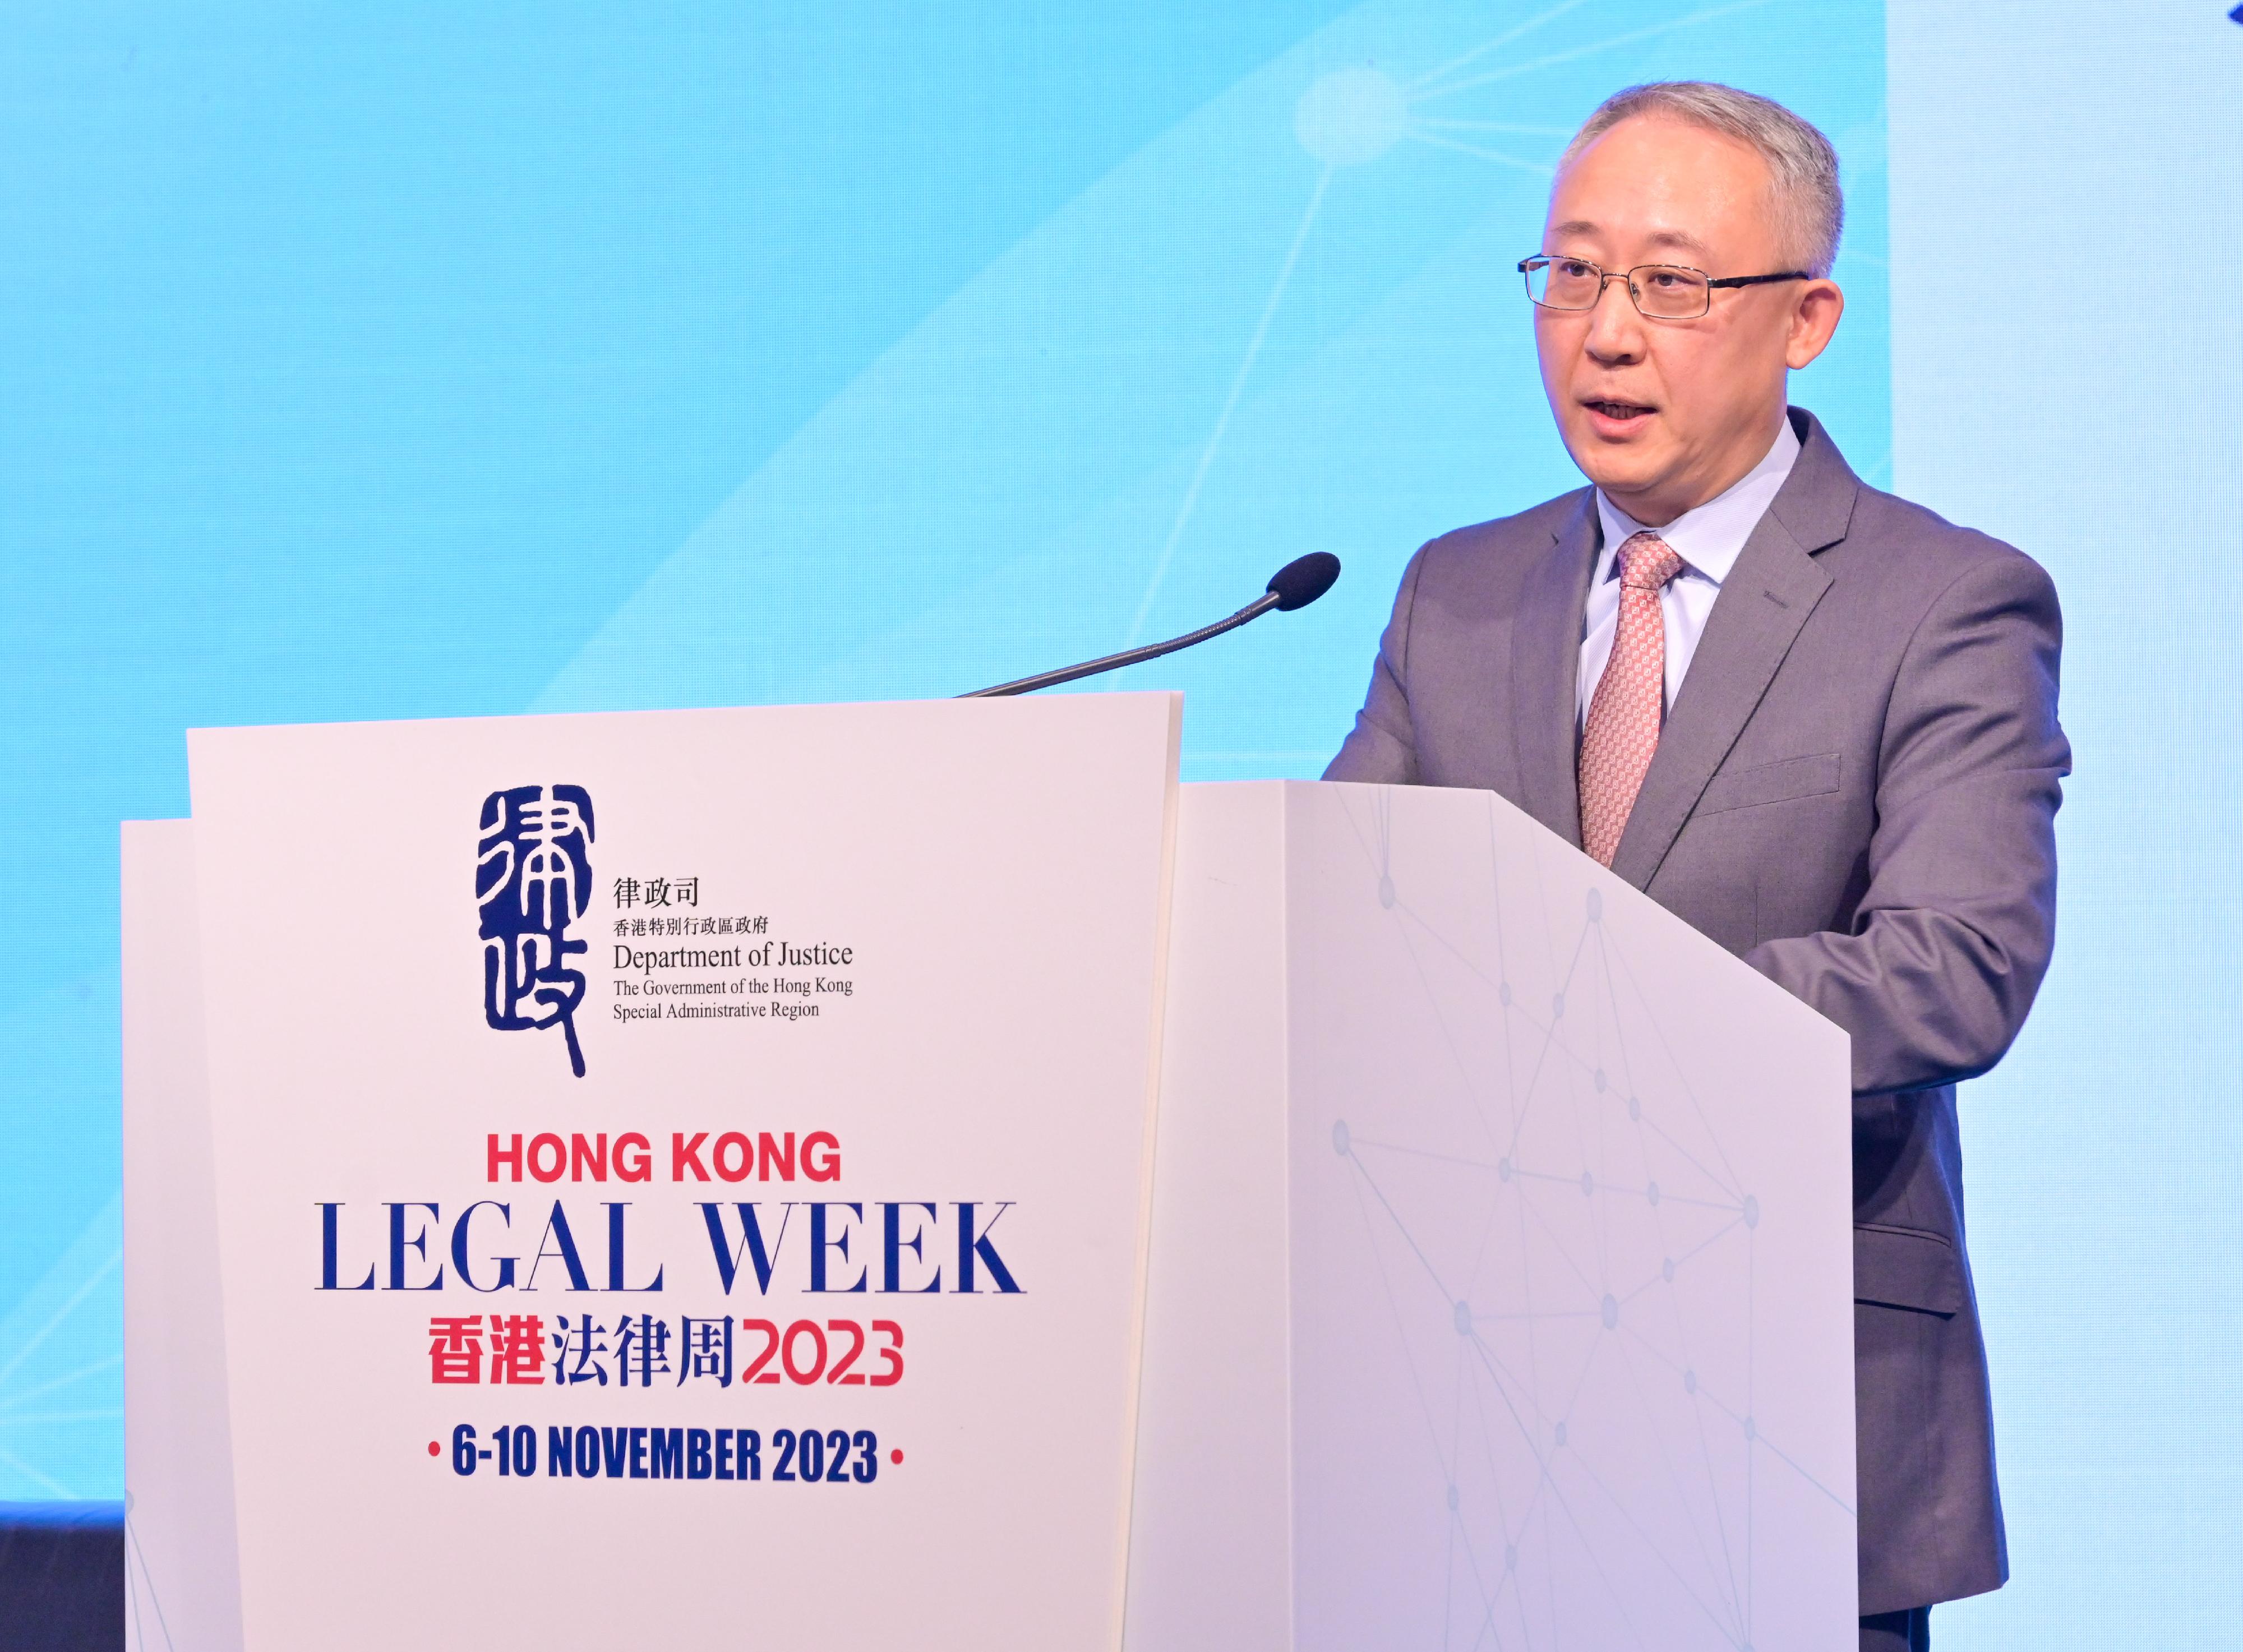 The Acting Commissioner of the Office of the Commissioner of the Ministry of Foreign Affairs of the People's Republic of China in the Hong Kong Special Administrative Region, Mr Li Yongsheng, delivers welcome remarks at the 5th UNCITRAL Asia Pacific Judicial Summit - Judicial Conference under the Hong Kong Legal Week 2023 today (November 6).
